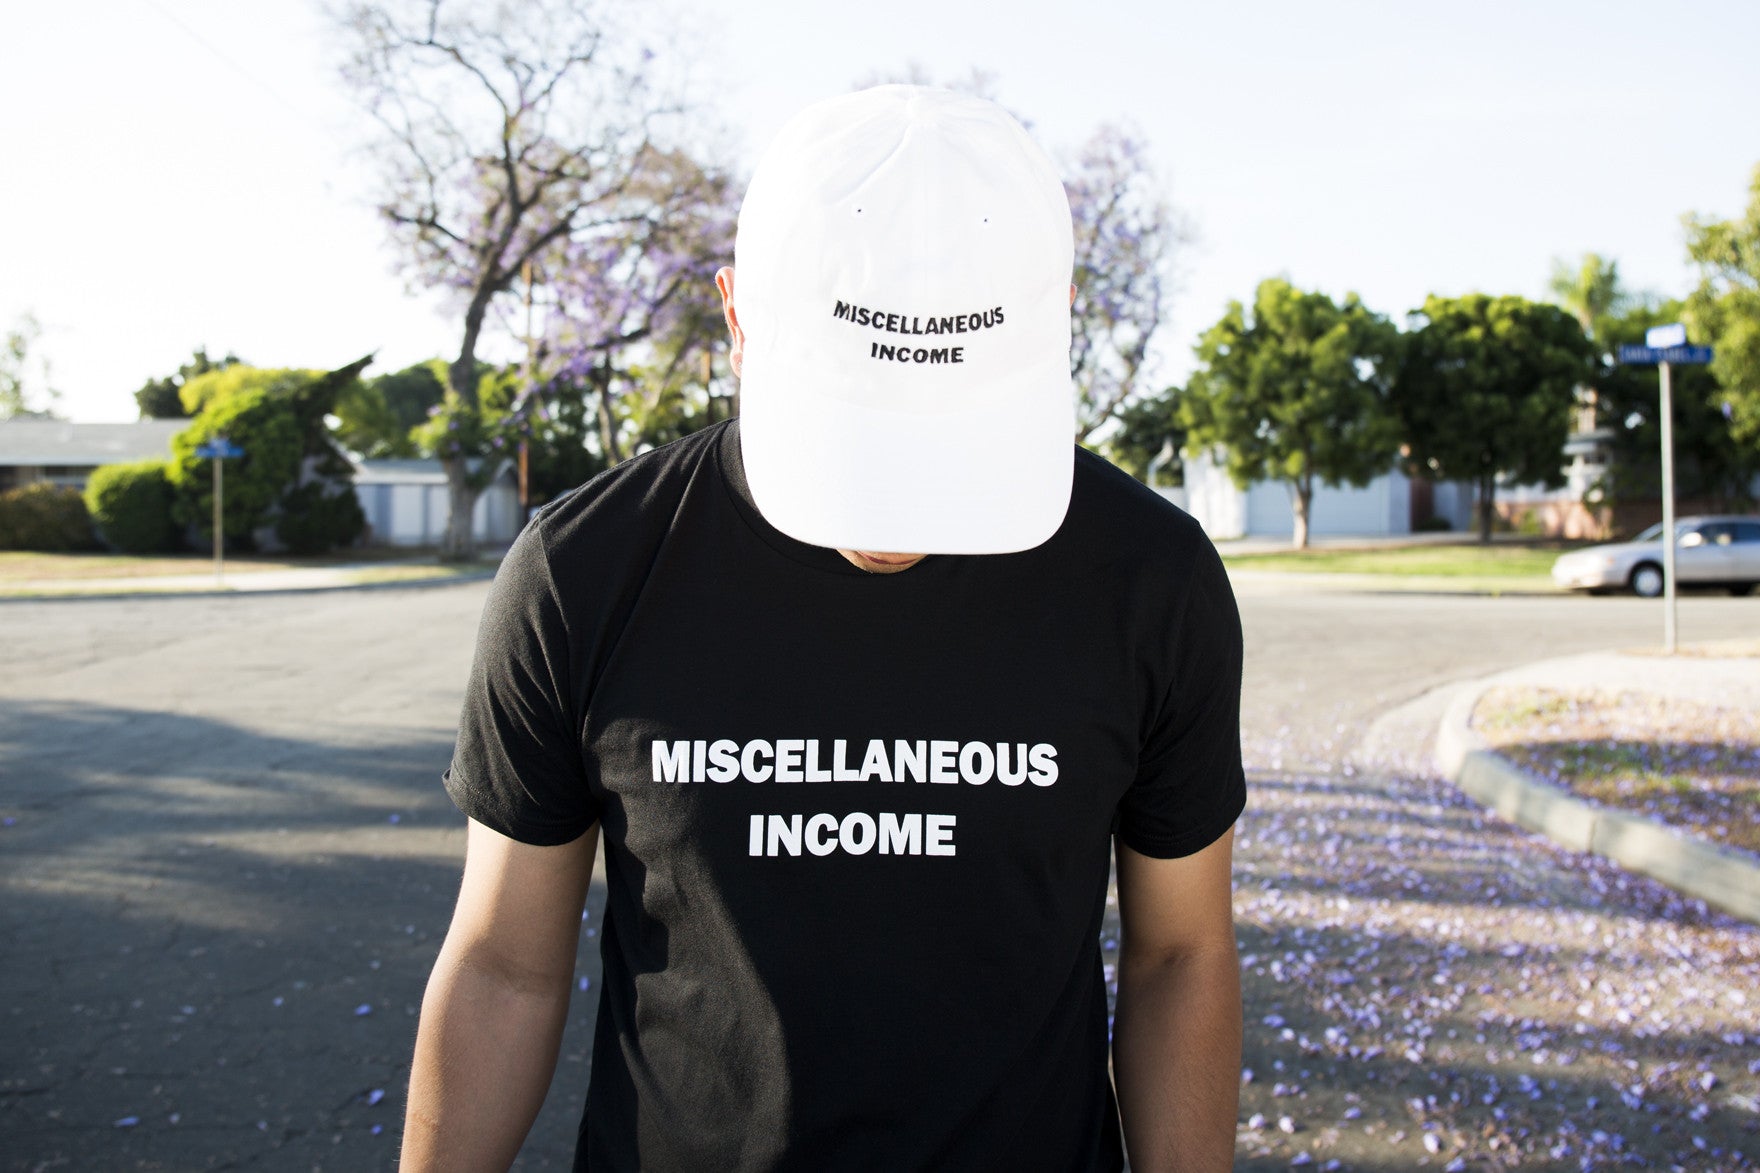 1099 Misc Miscellaneous Income Dad Hat